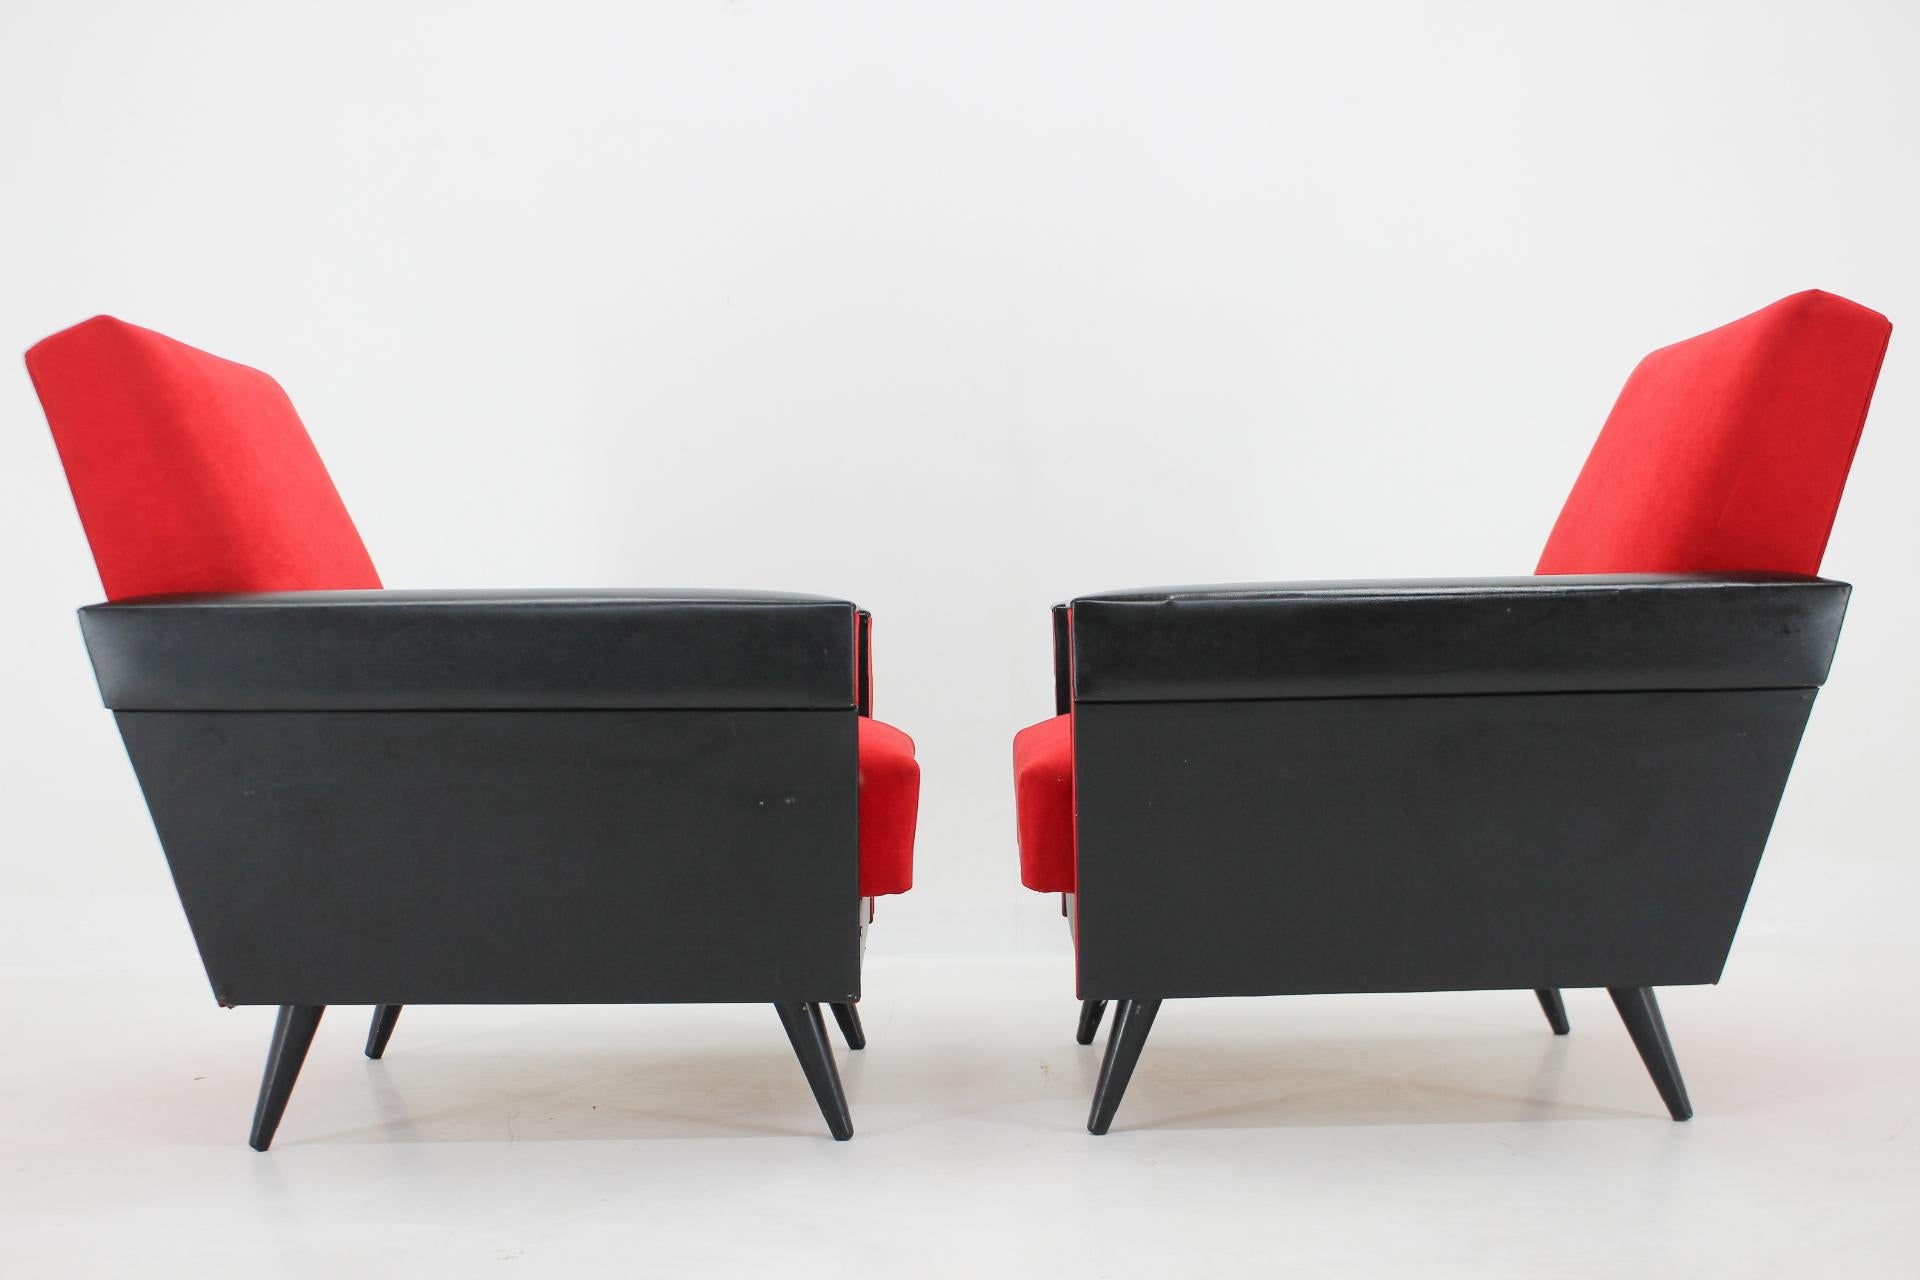 Pair of mid-century red and black armchairs from former Czechoslovakia. The upholstery is original in very good condition with some small defects on the leatherette part (see photo).